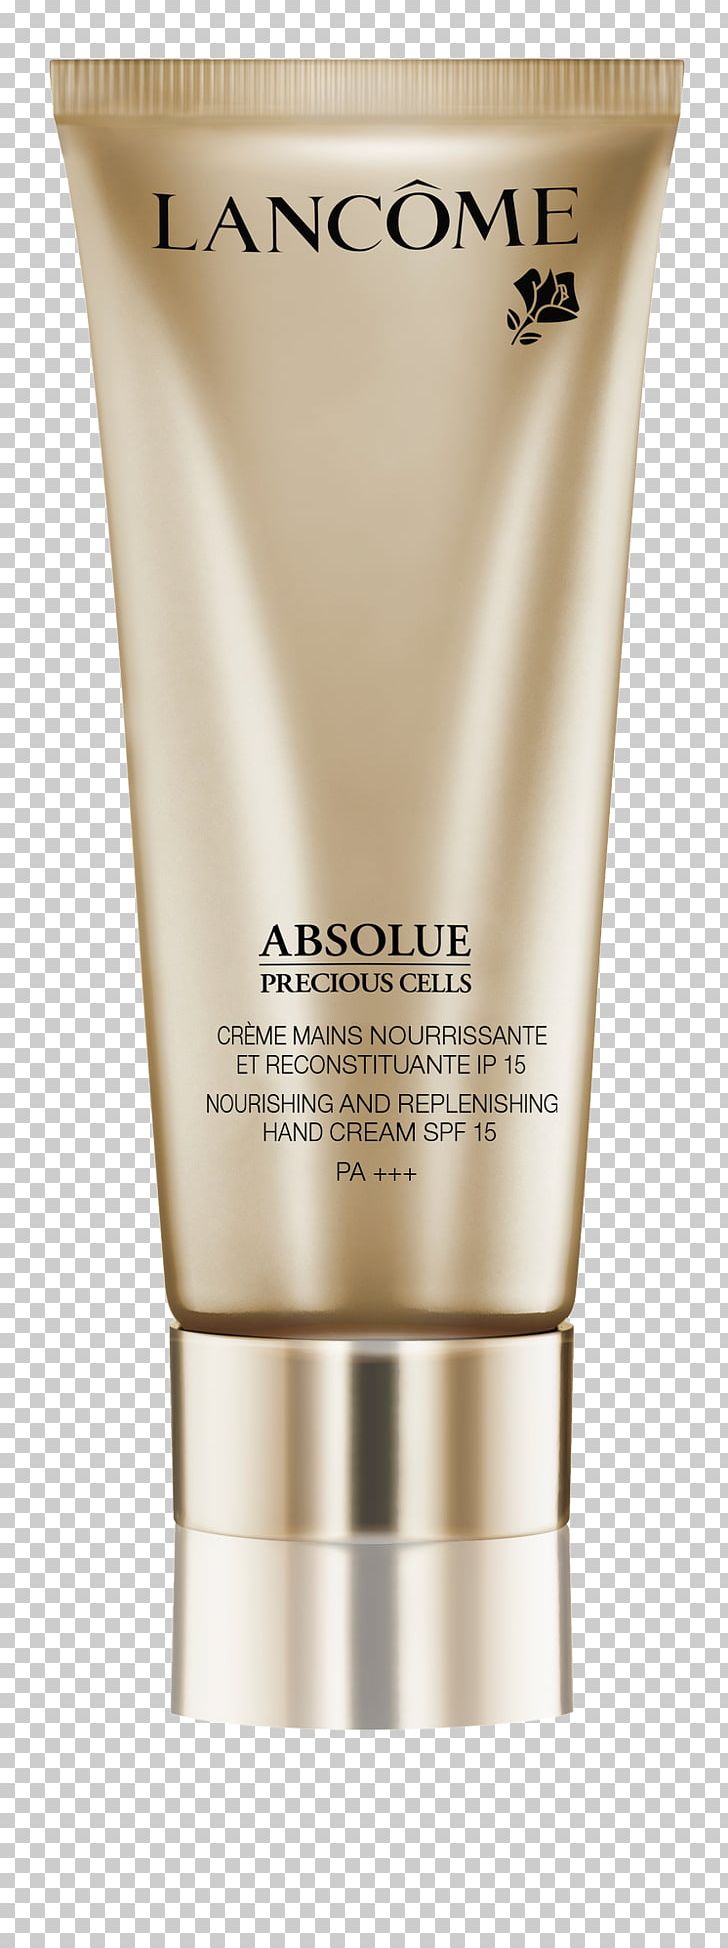 Lancôme Absolue Precious Cells Day Cream Lotion Lancôme Absolue Precious Cells Day Cream Skin PNG, Clipart, Balsam, Biotherm, Cosmetics, Cream, Lancome Free PNG Download